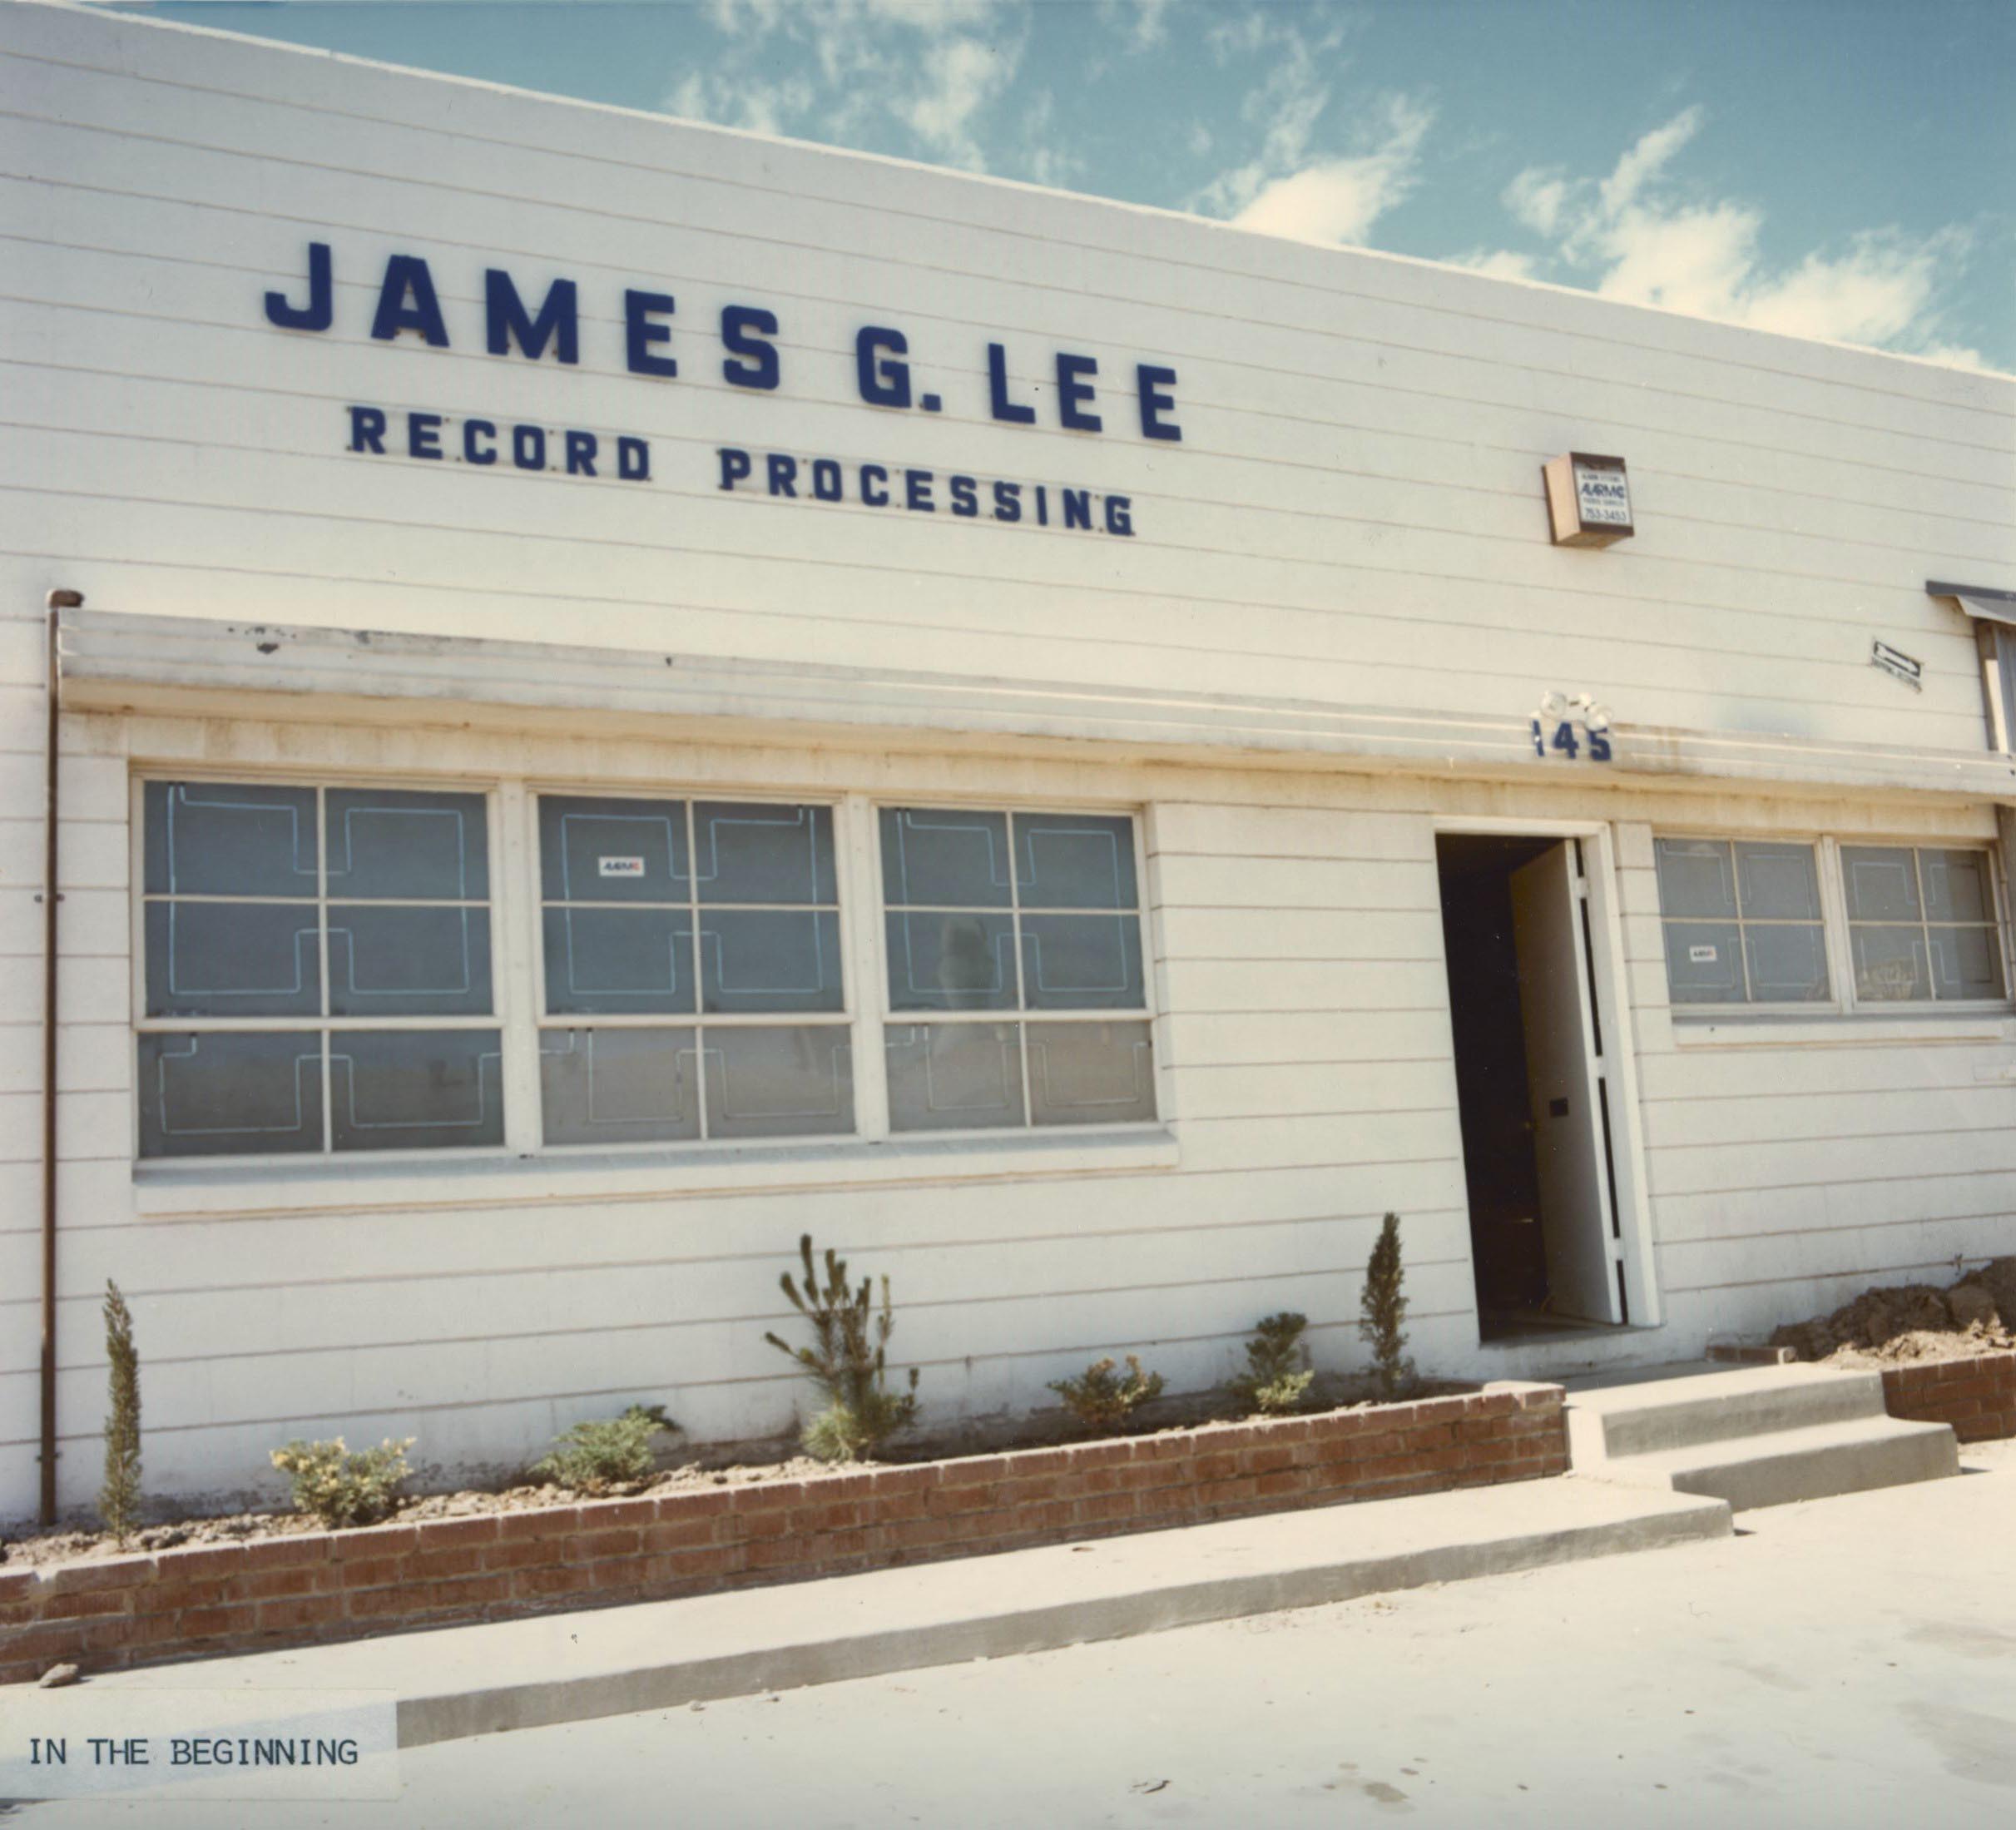 The James G. Lee recording studio is a white one story building.